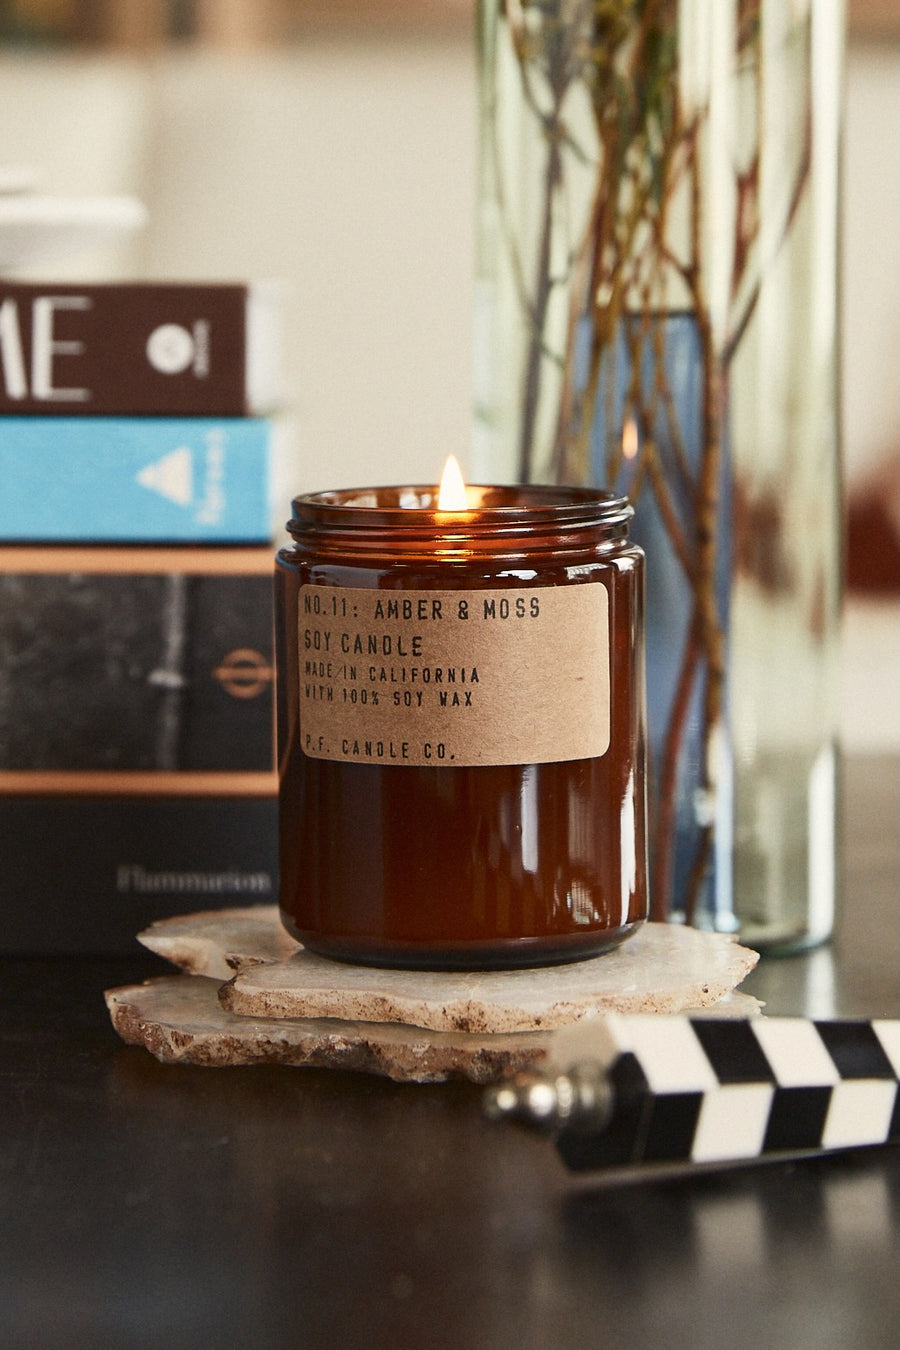 P.F. Candle Co. Standard Soy Candle - Amber & Moss